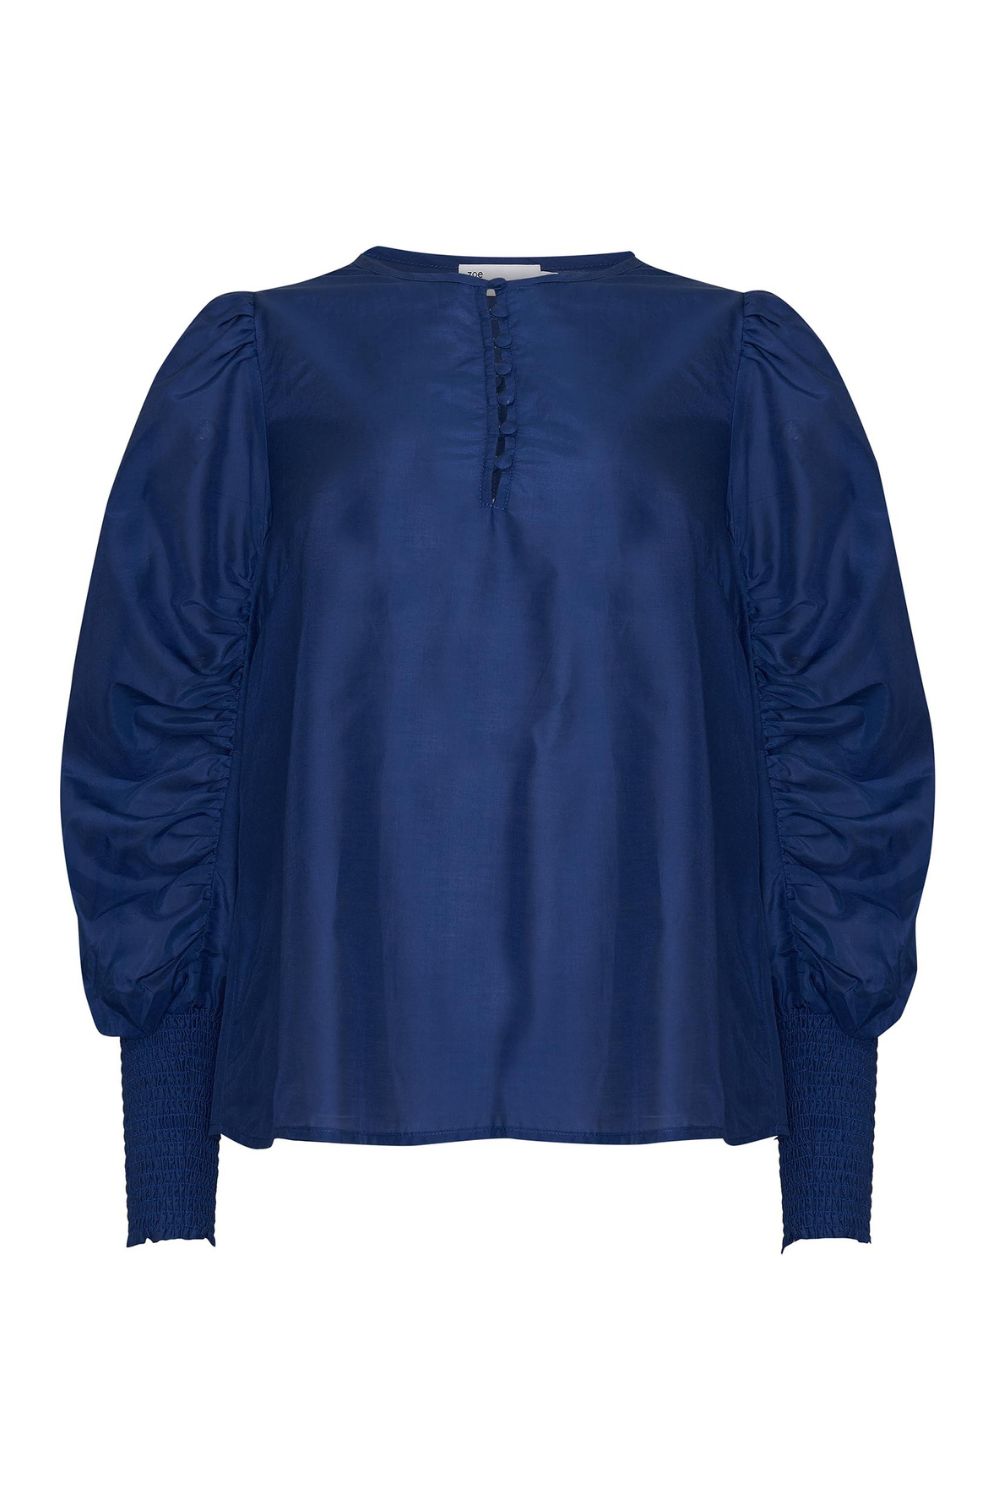 slate blue, blue, top, long sleeve, shirred cuffs, blouson sleeve, covered buttons round neckline, product image